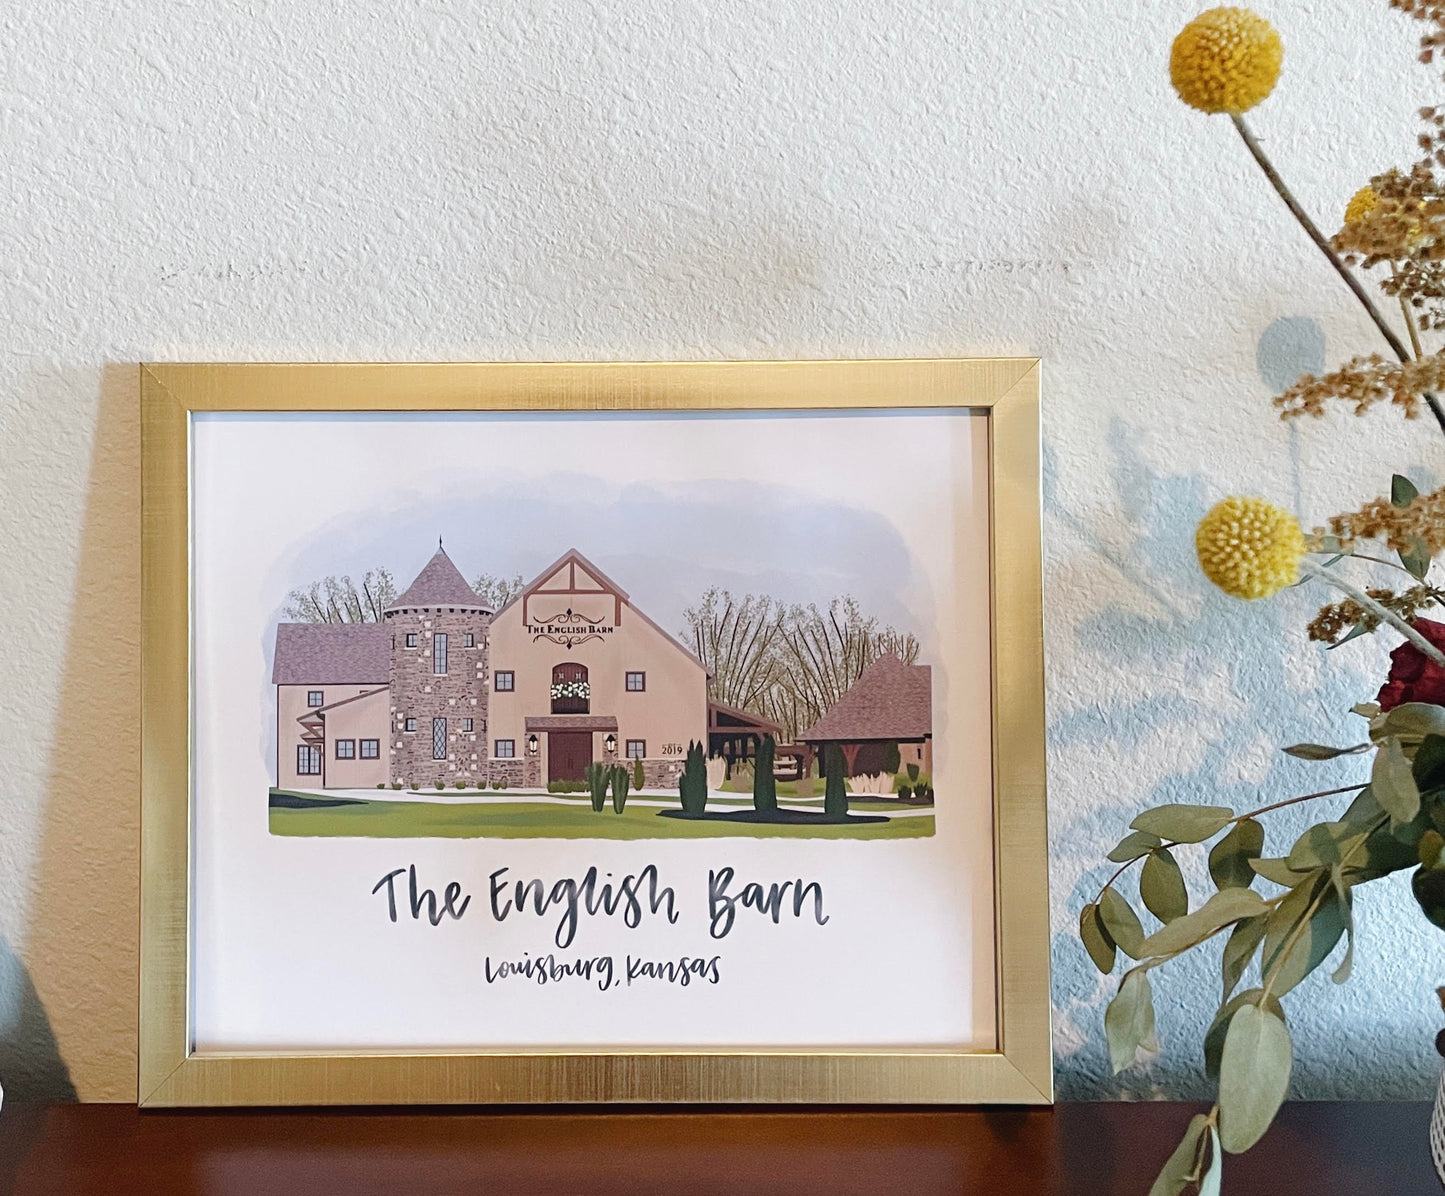 home prints, print shop, art prints, paintings home, custom house portrait, personalized gift, new home gift, home gift, watercolor house portrait from photo, housewarming gift, home illustration, realtor closing gift, closing gift, first home, our first home print, homeowners gift, prints shop